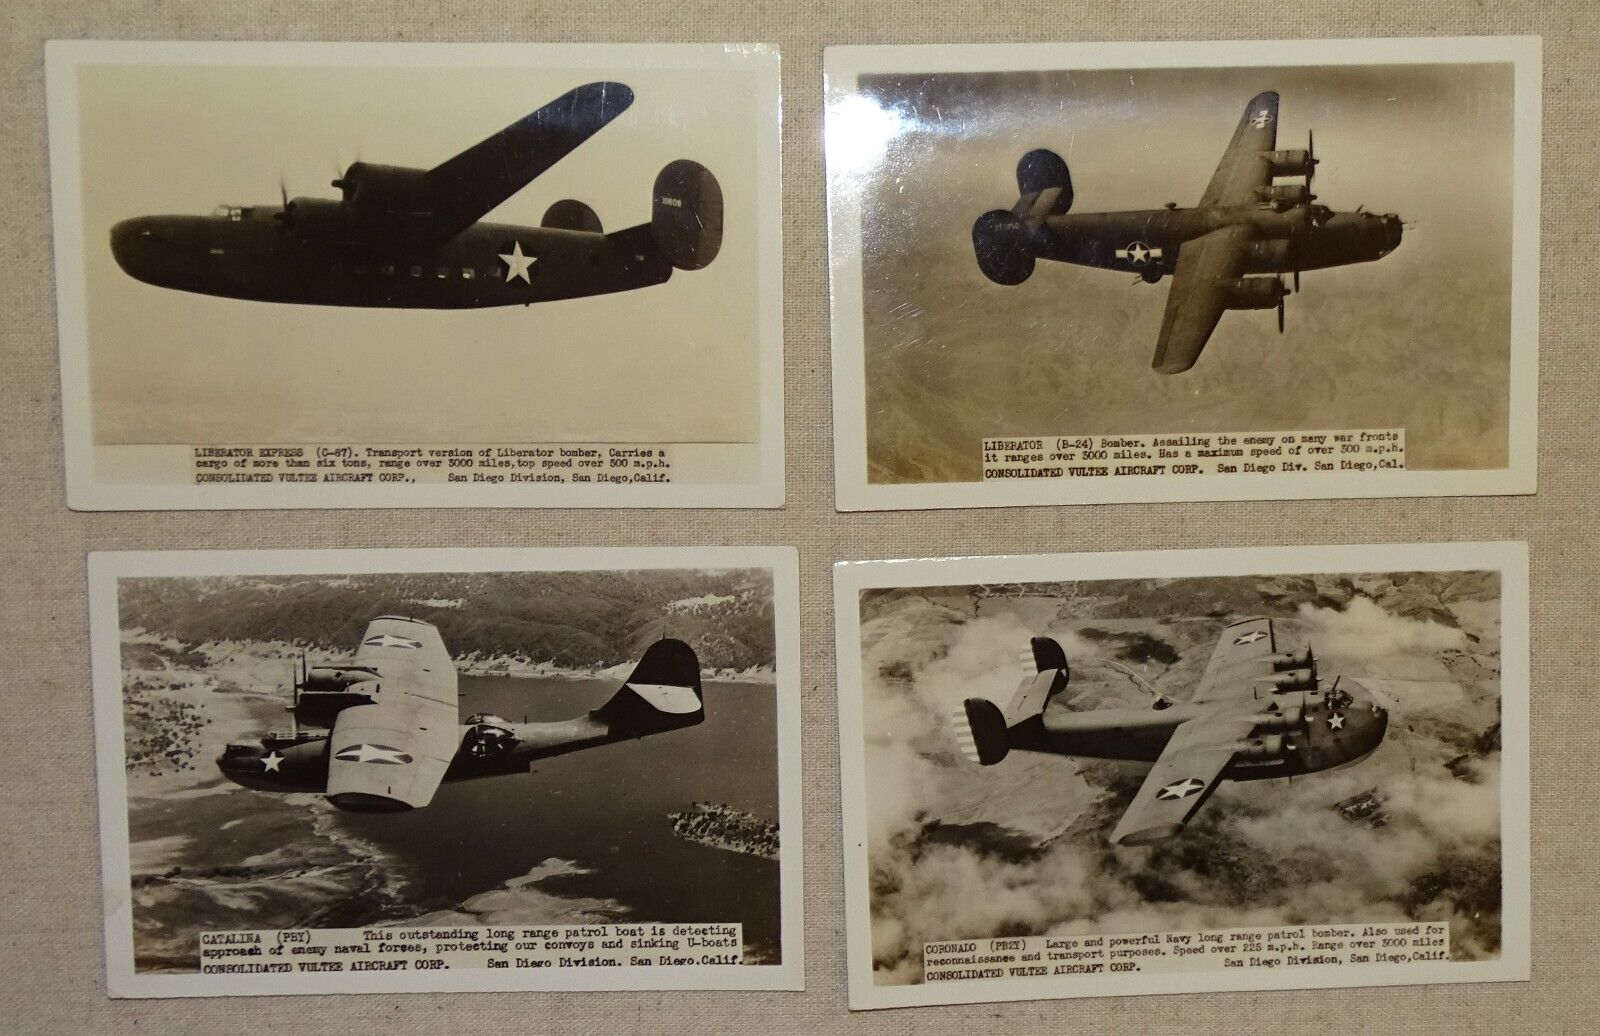 4 Real Photo Postcards WWII Era Consolidated Vultee Aircraft Corp. San Diego Cal